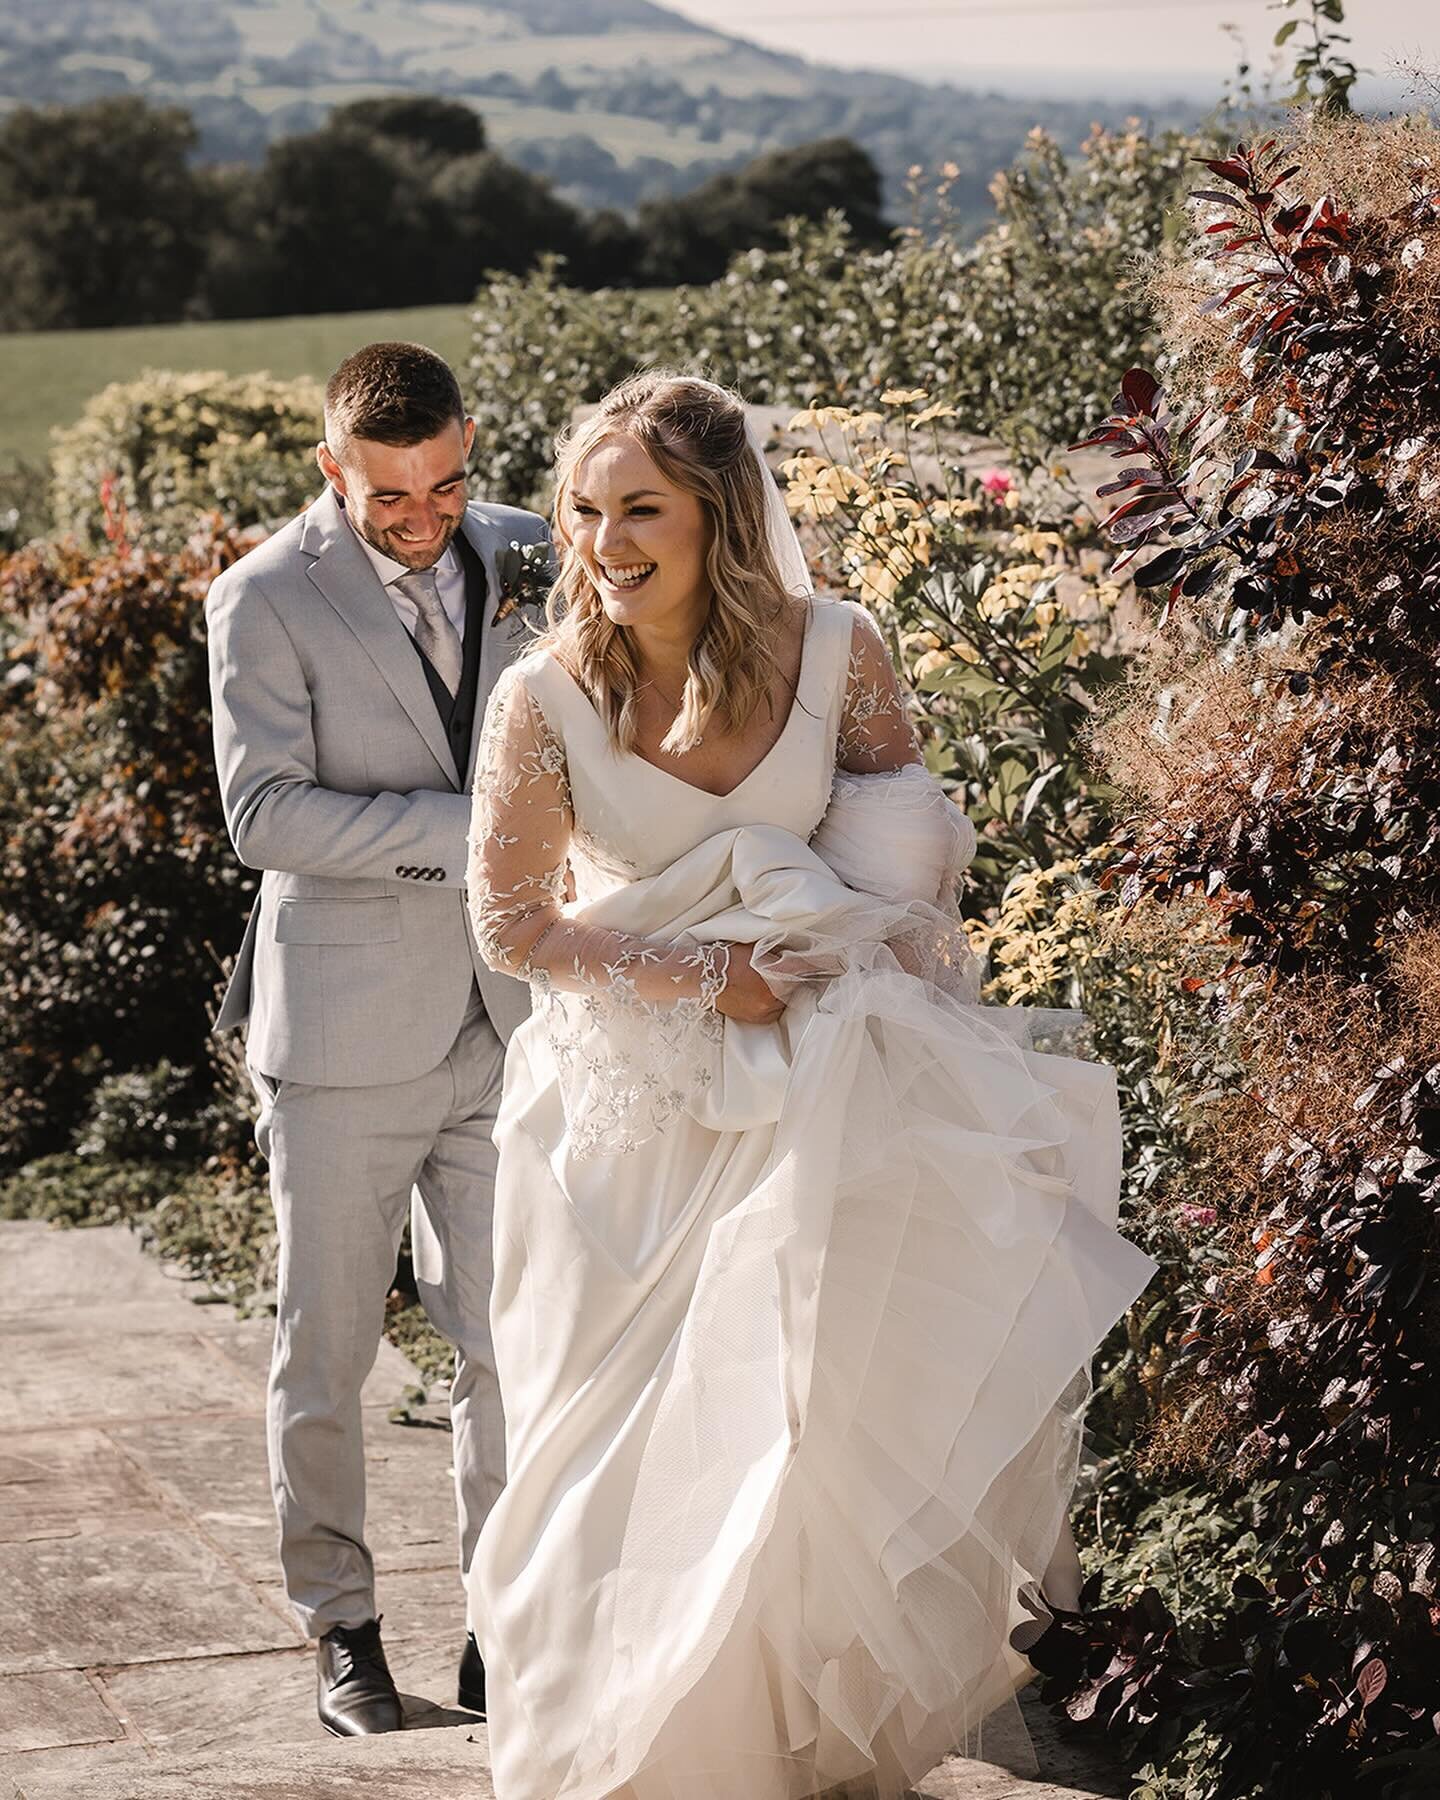 J &amp; T&hellip; 
 
What a day! This September wedding brought some very welcome sunshine, all the joy, and one of Heaton House Farm&rsquo;s legendary sunsets ☀️
 
We had a fabulous day with Jess &amp; Tom and their wonderful family and friends &nda